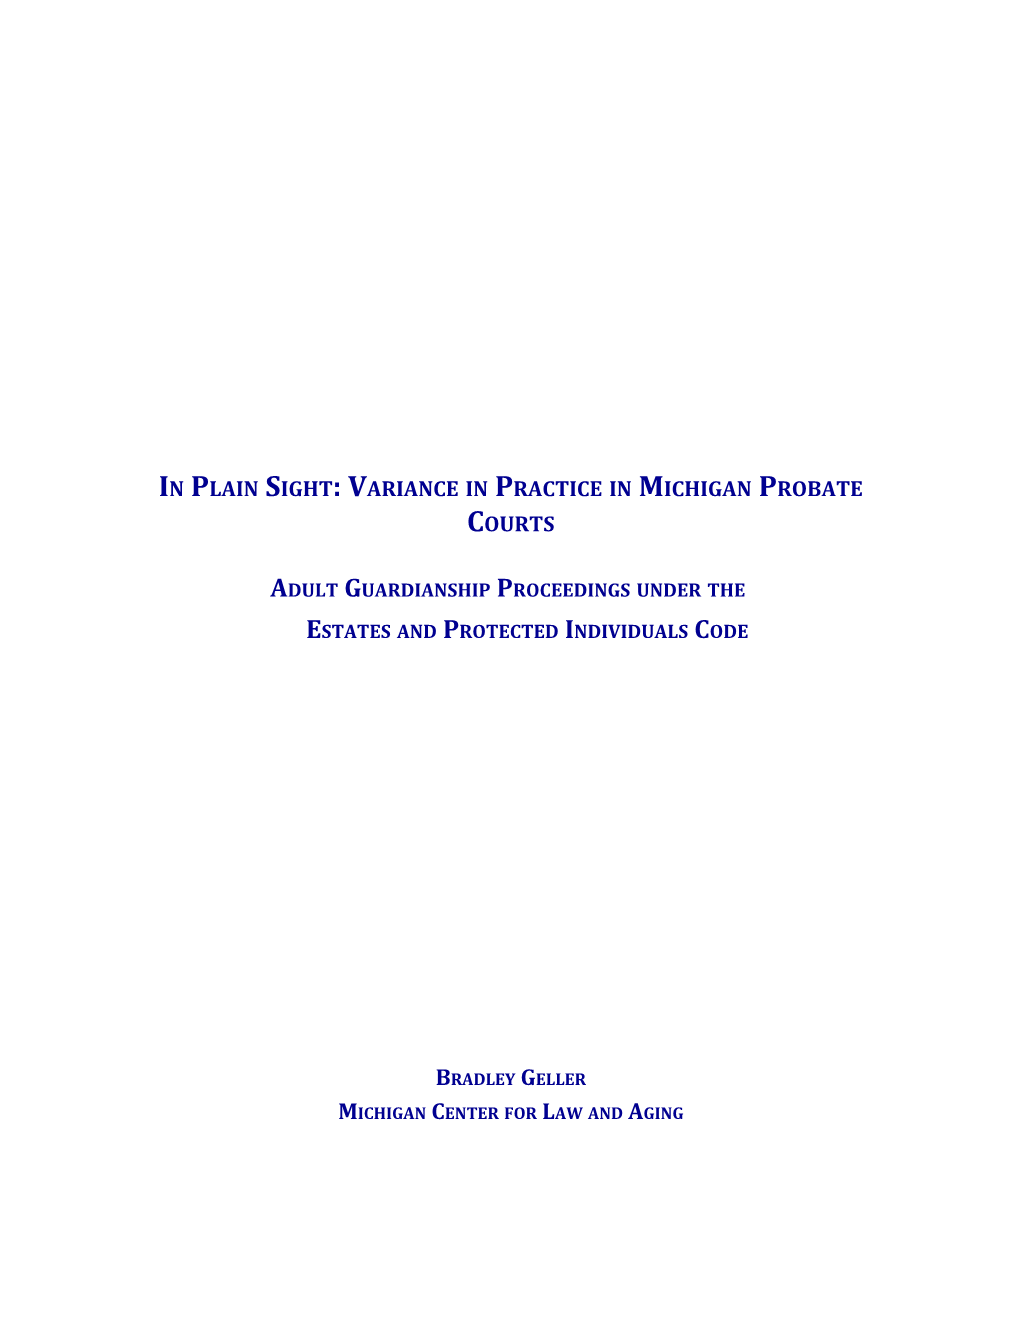 In Plain Sight: Variance in Practice in Michigan Probate Courts